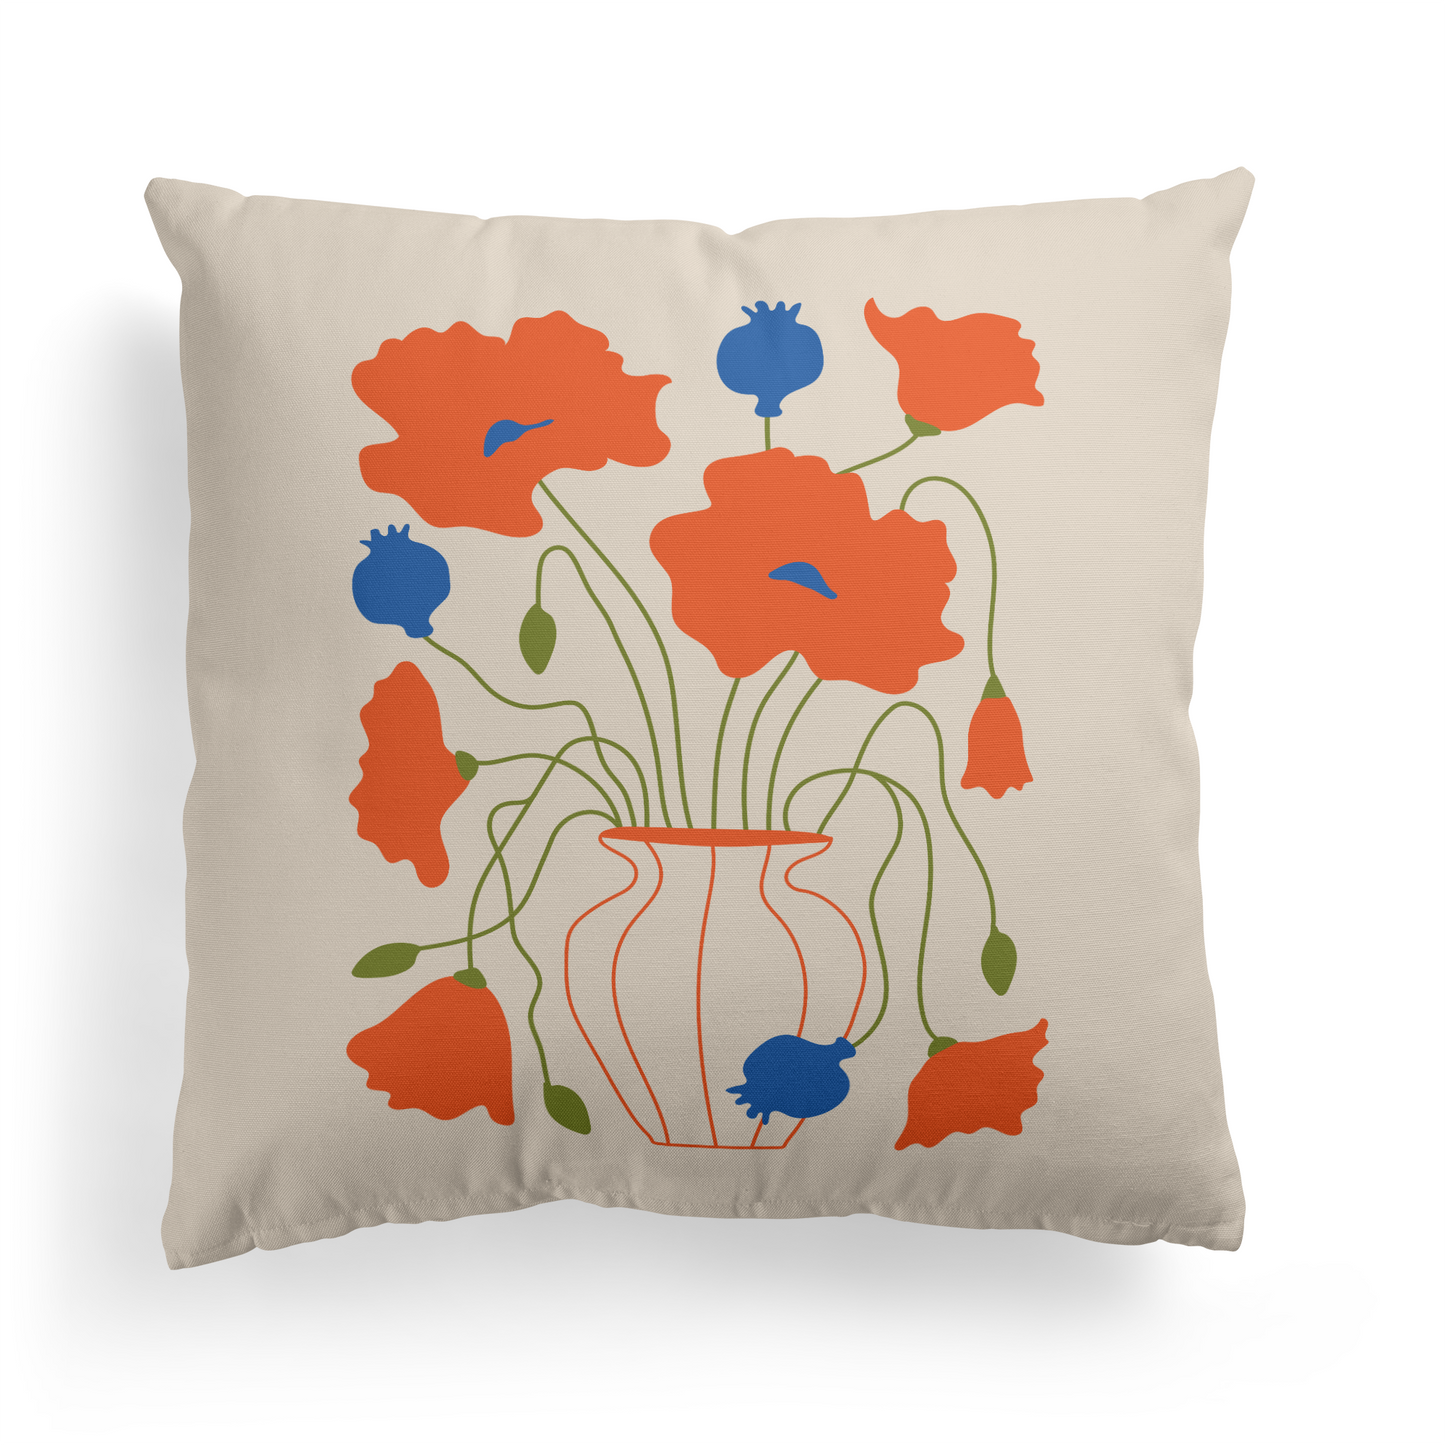 Home Decor Throw Pillow with Flowers